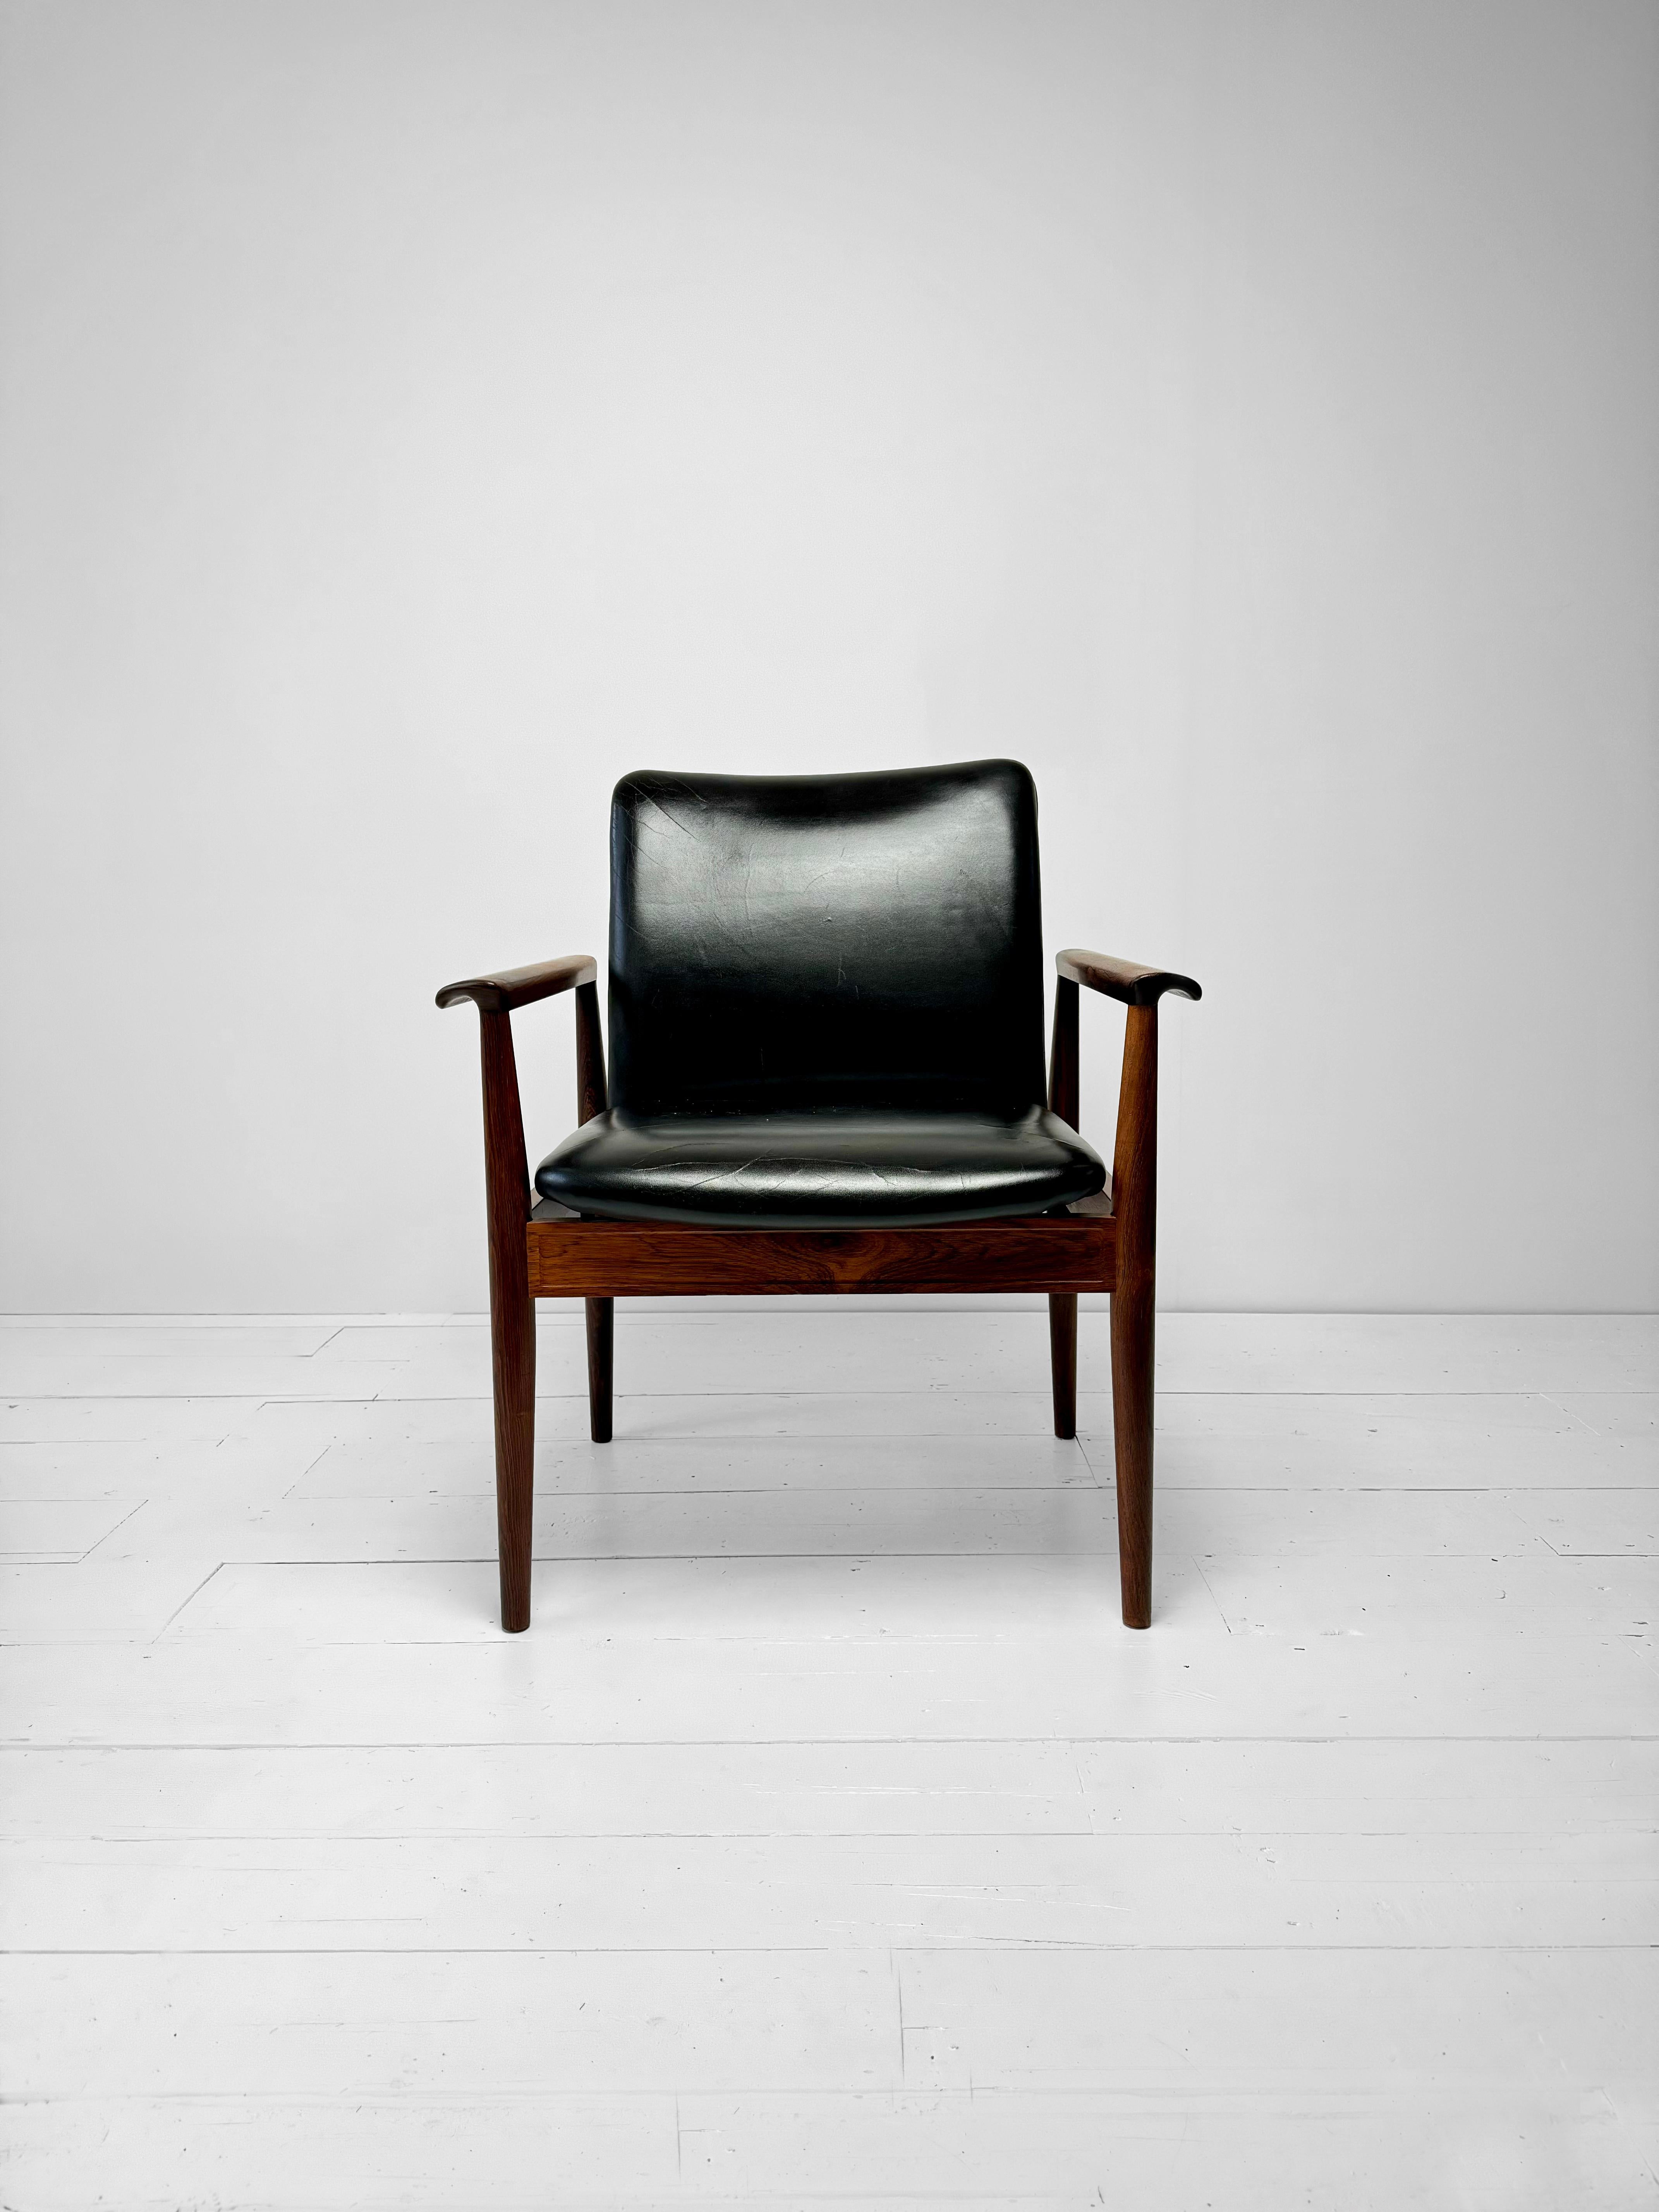 Set of Diplomat Armchairs in Rosewood and Leather by Finn Juhl, Denmark c.1960's In Good Condition For Sale In London, GB